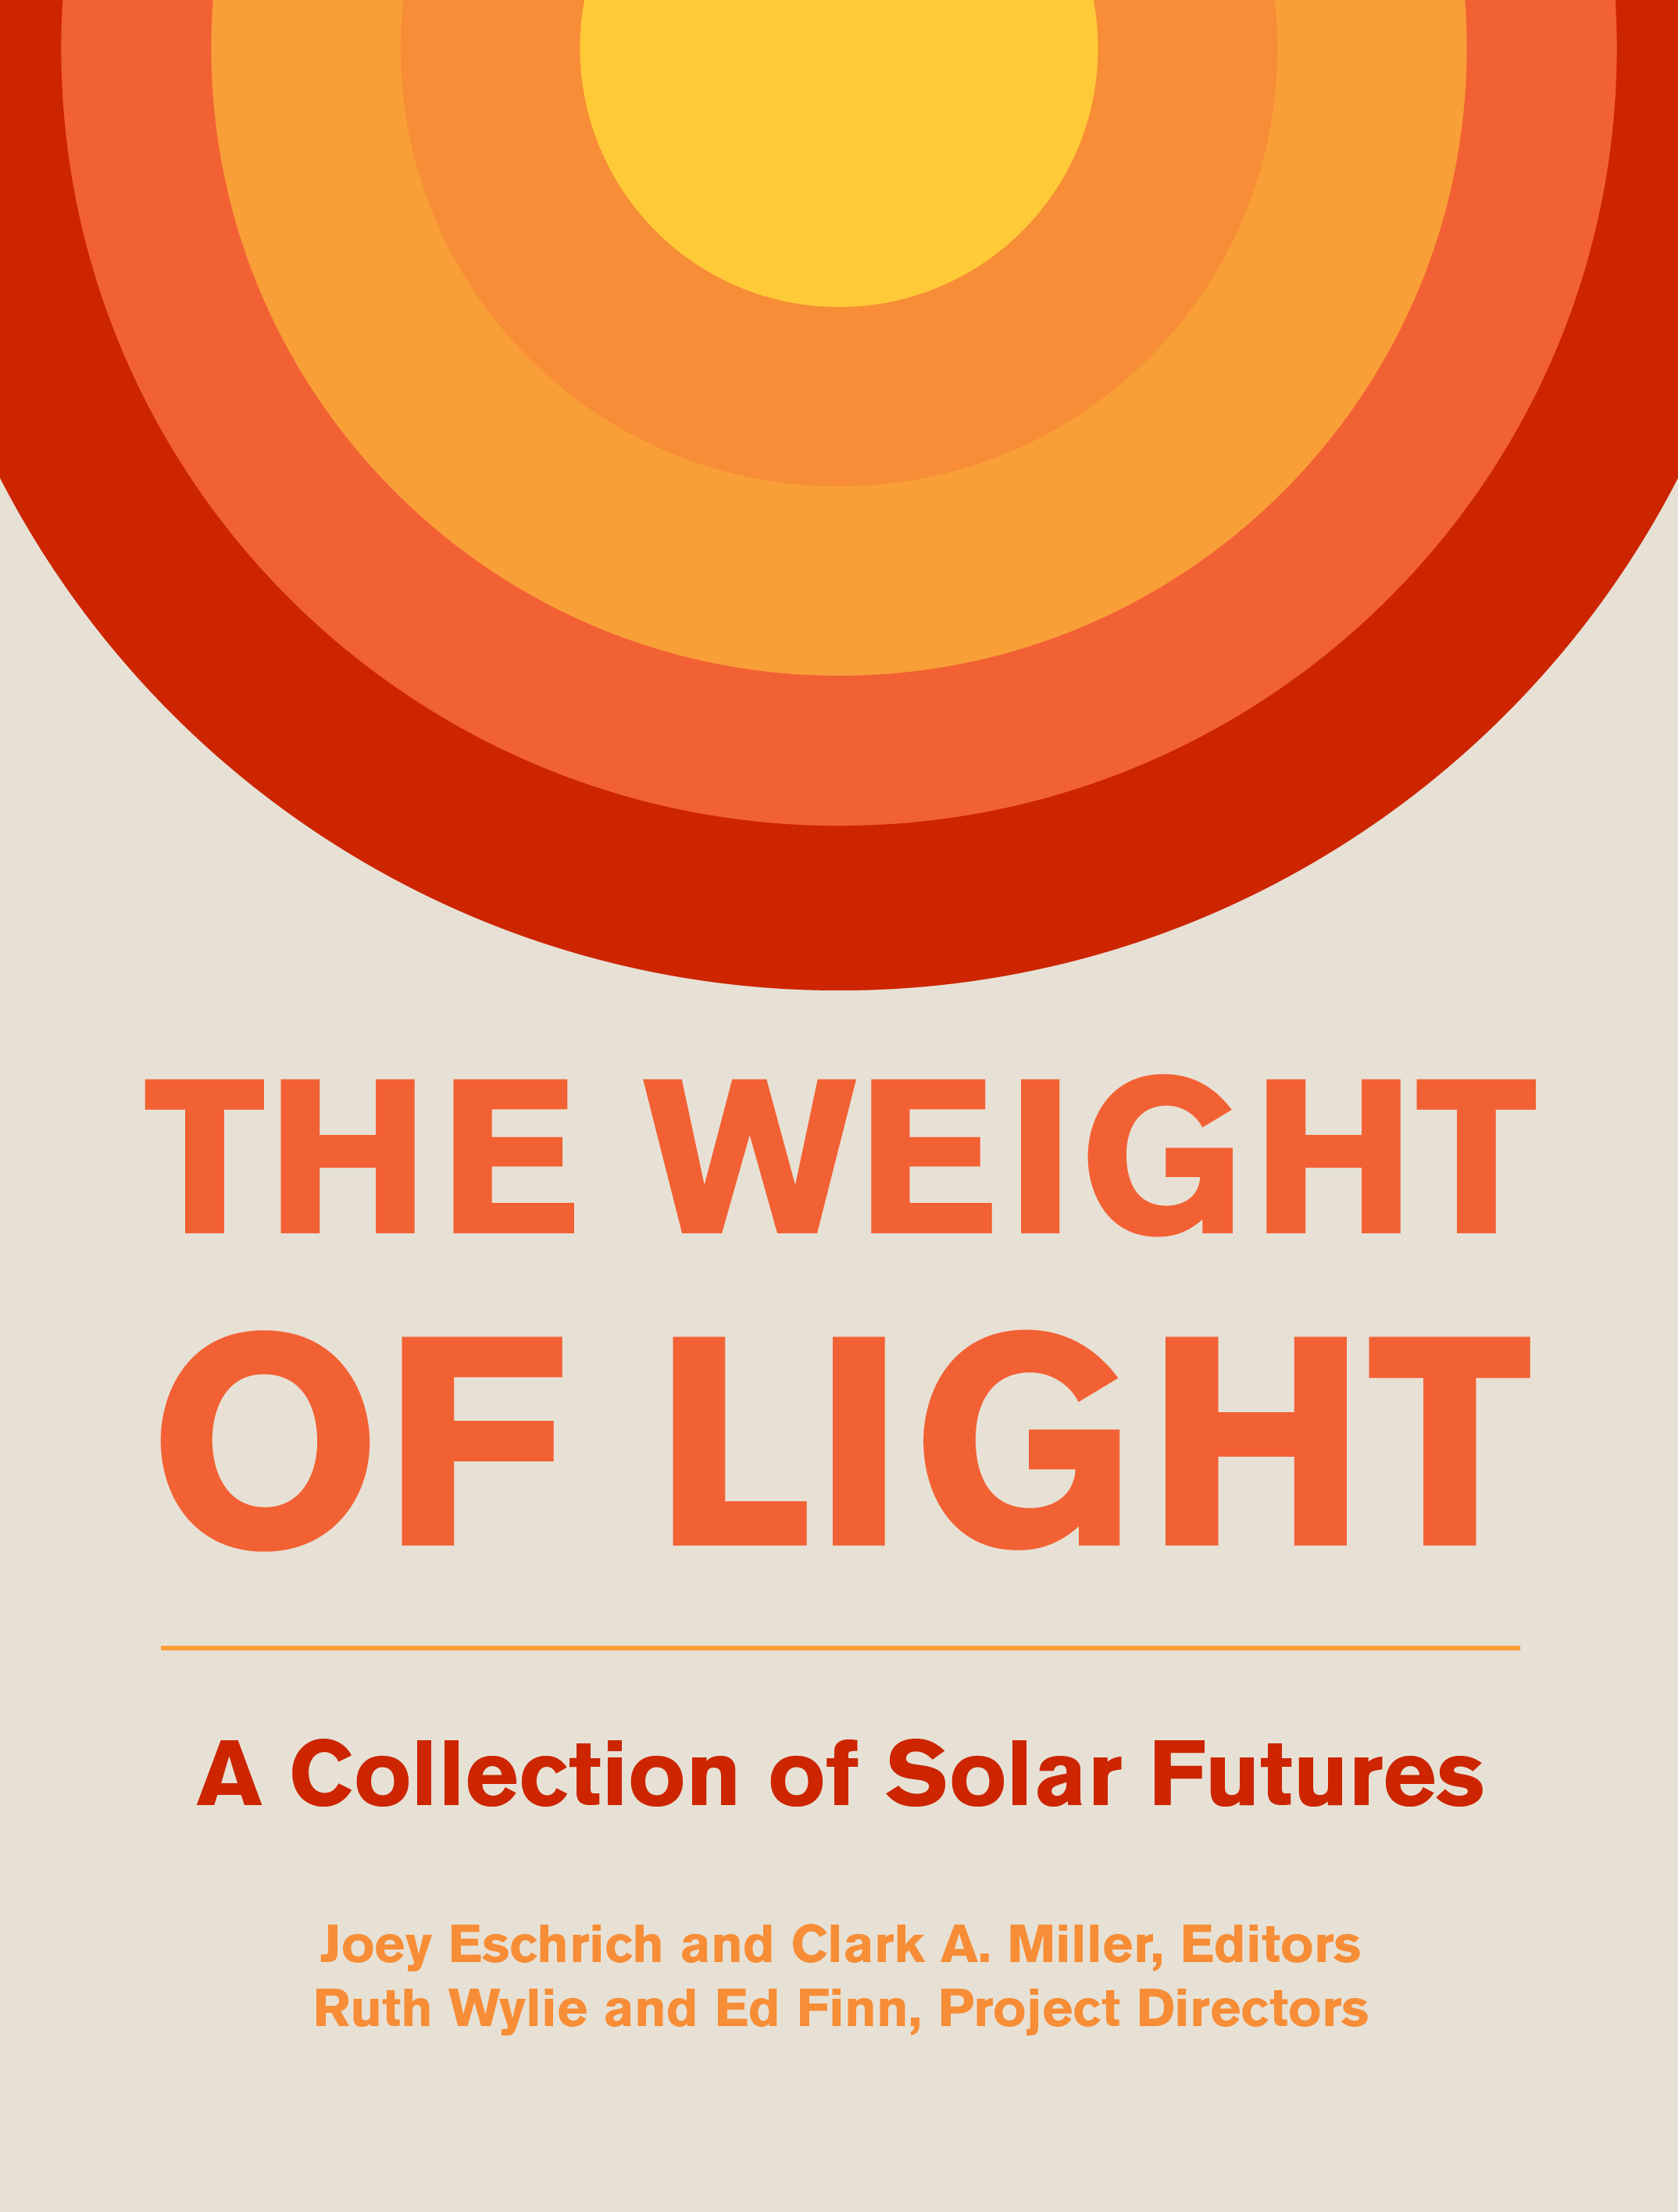 The Weight of Light (Center for Science and the Imagination, Arizona State University)